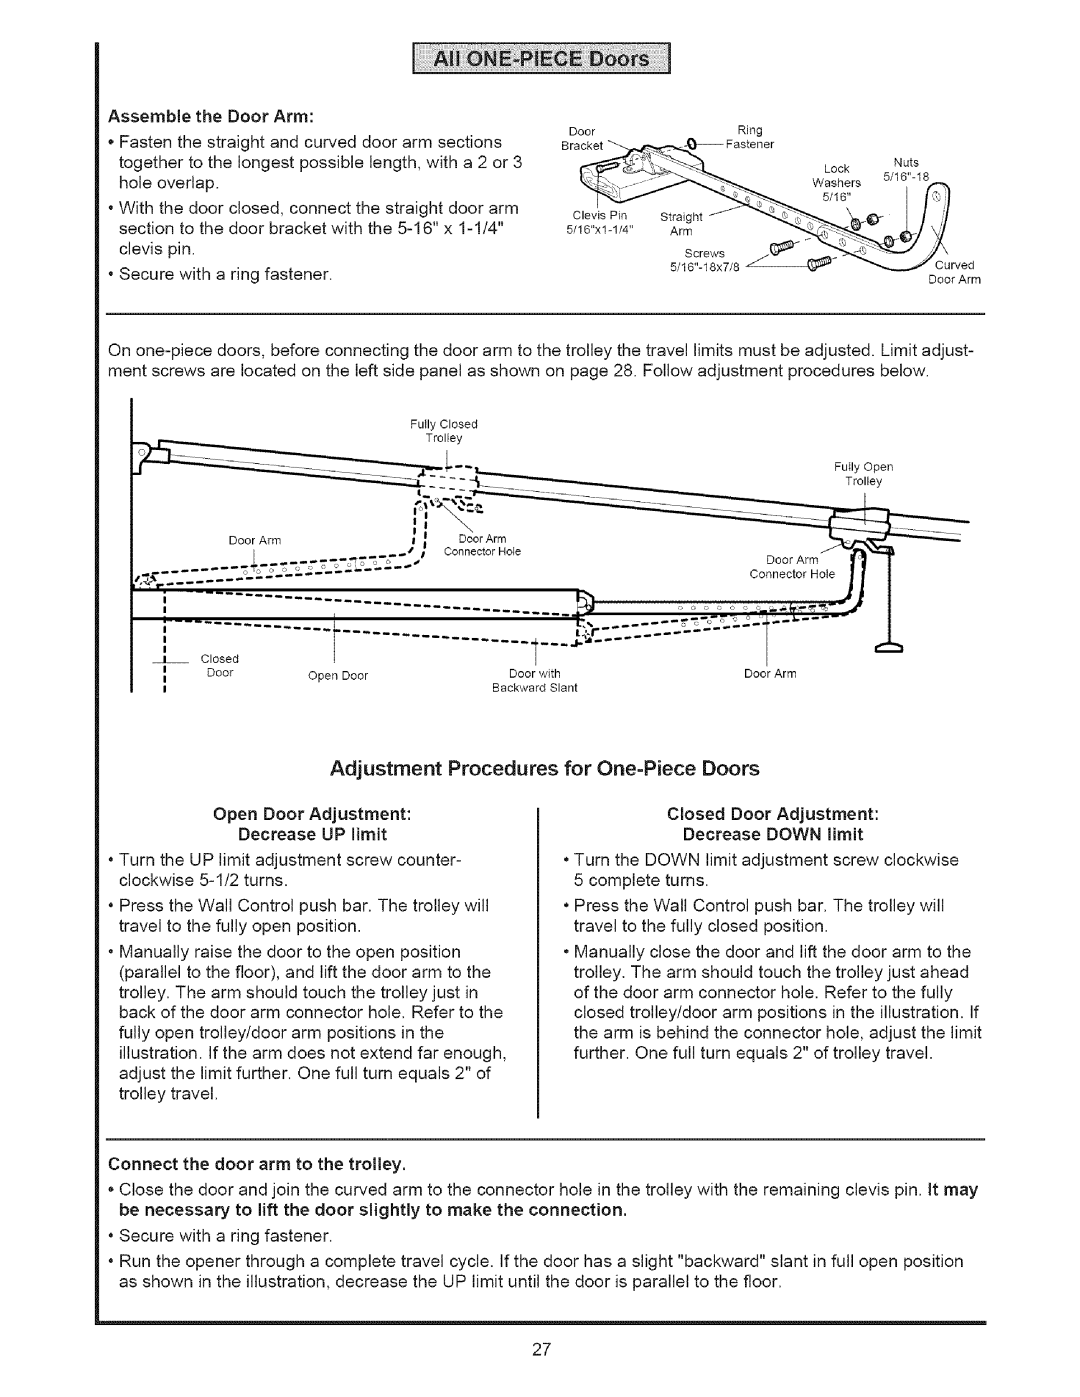 Sears 139.53535SRT1 operating instructions AssembletheDoorArm Fastenthestraightandcurveddoorarmsections 